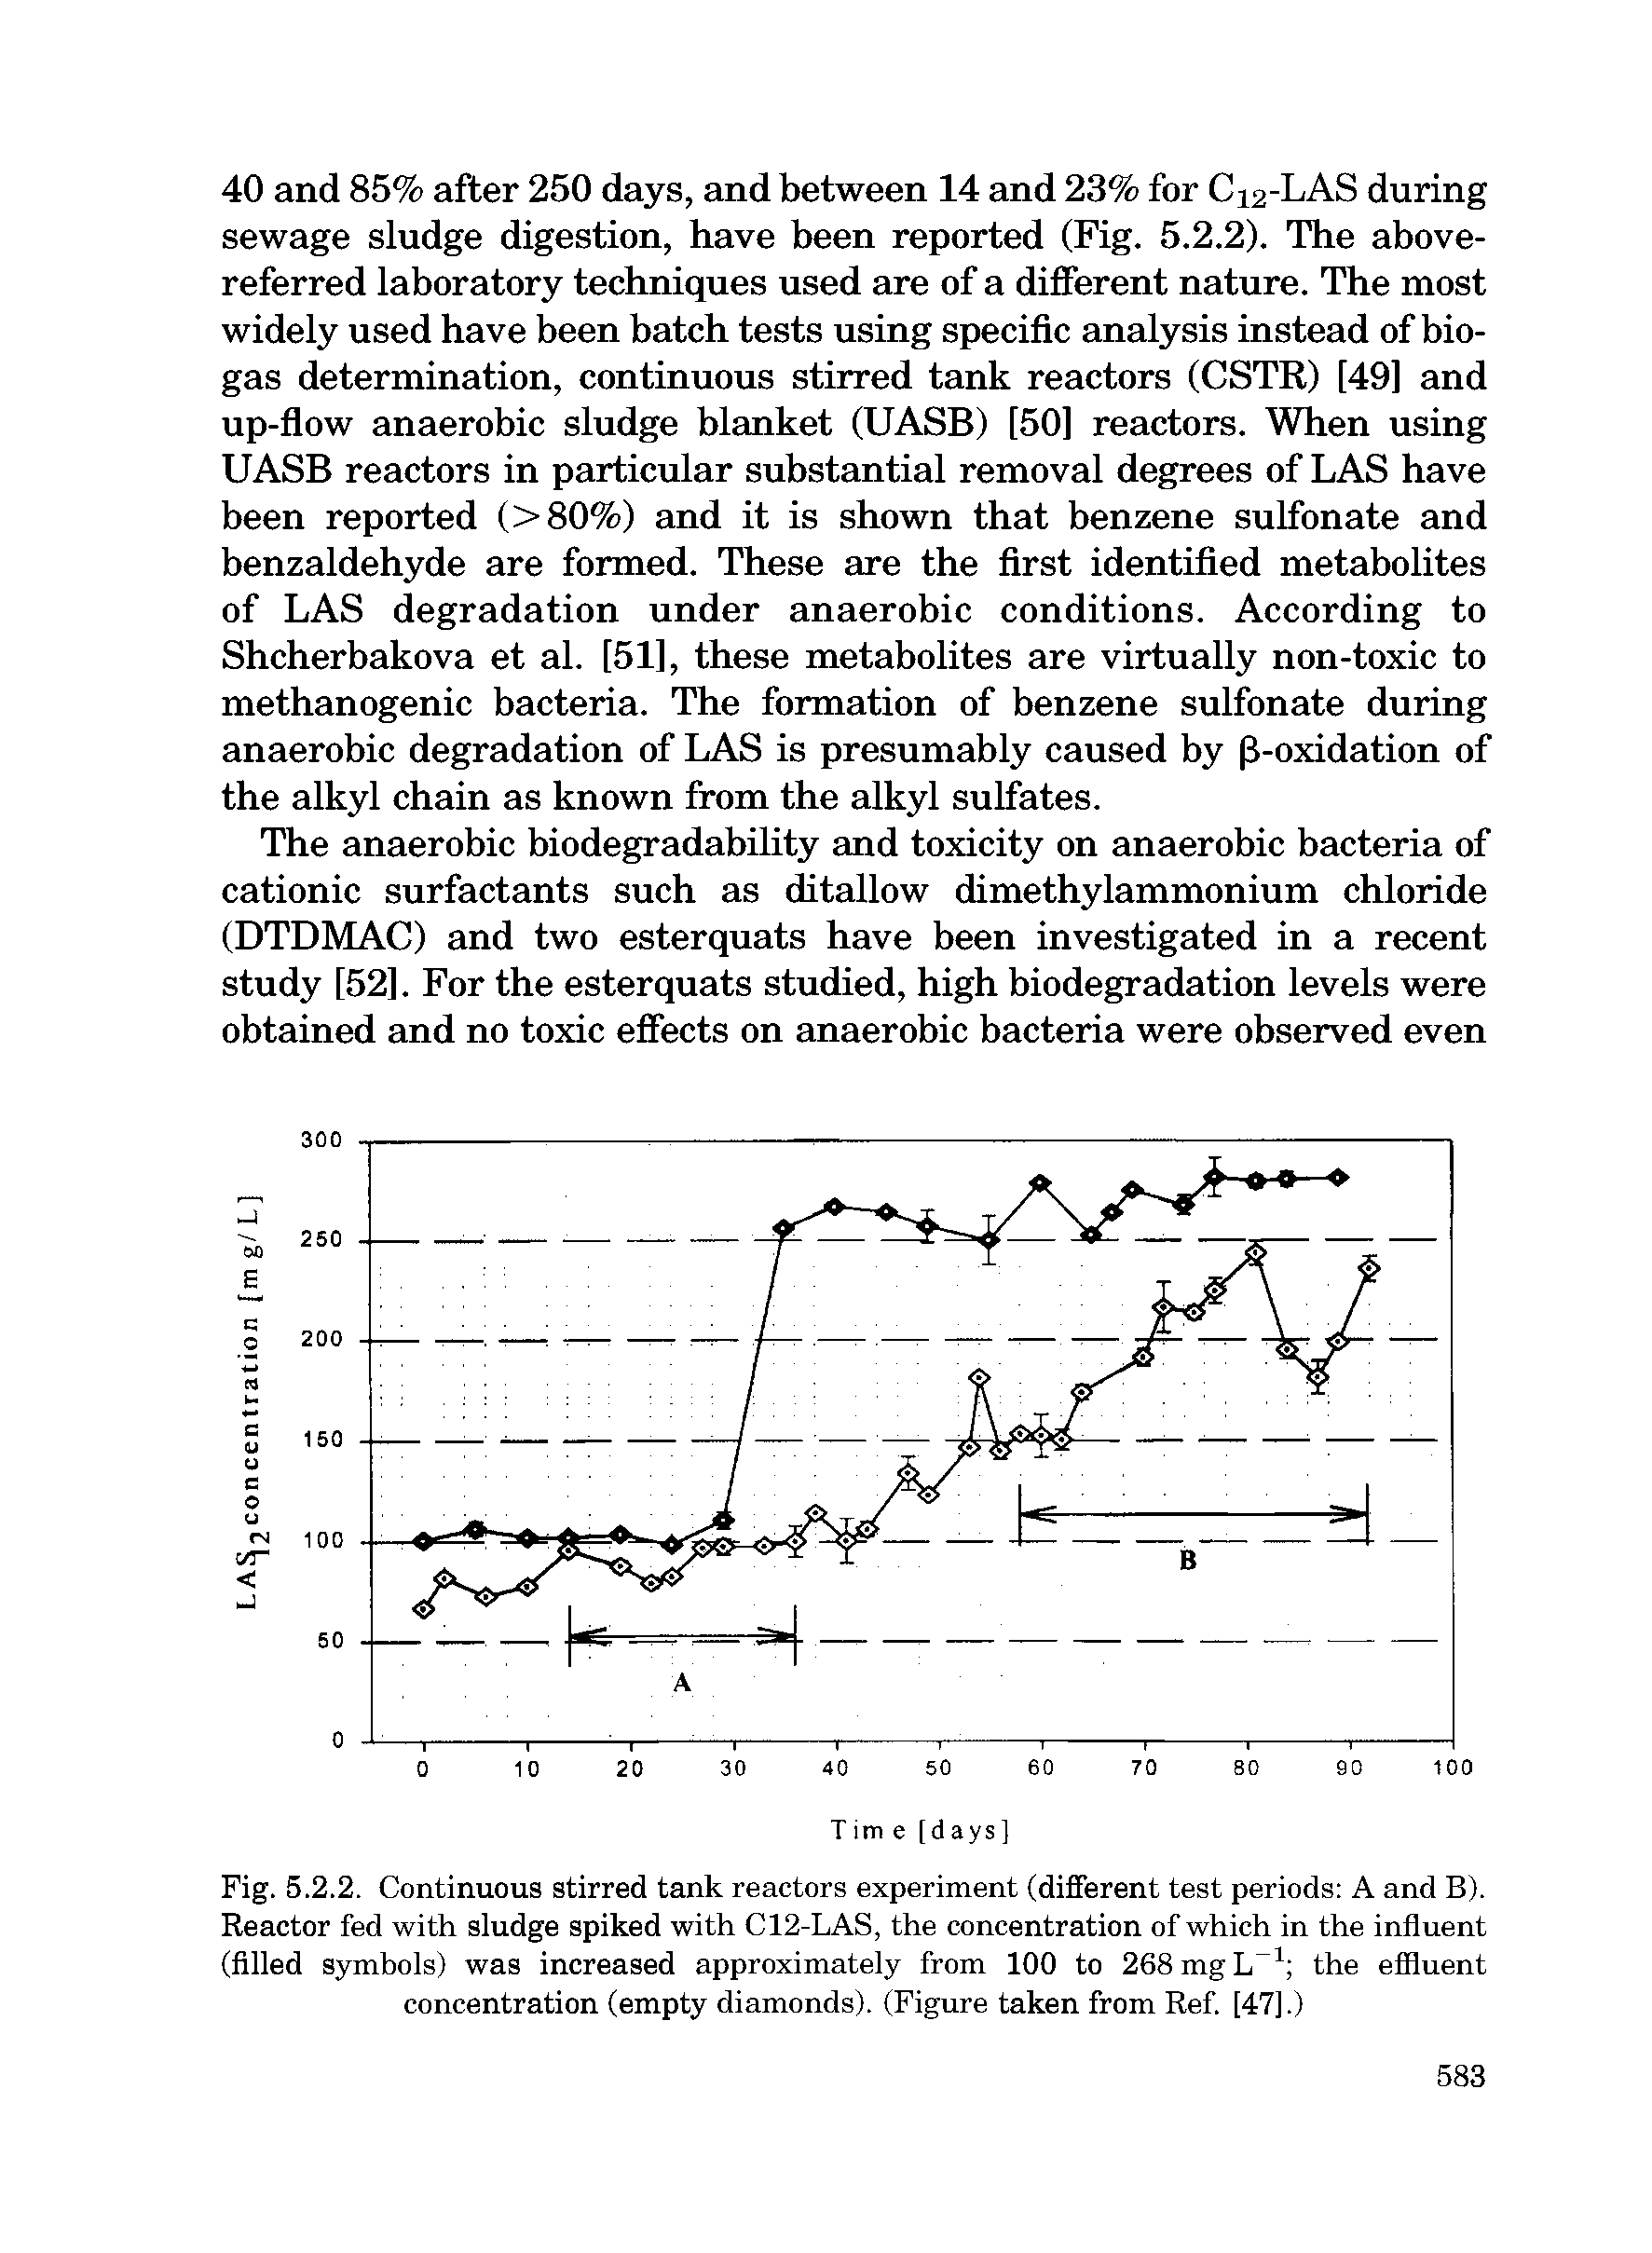 Fig. 5.2.2. Continuous stirred tank reactors experiment (different test periods A and B). Reactor fed with sludge spiked with C12-LAS, the concentration of which in the influent (filled symbols) was increased approximately from 100 to 268mgLT1 the effluent concentration (empty diamonds). (Figure taken from Ref. [47].)...